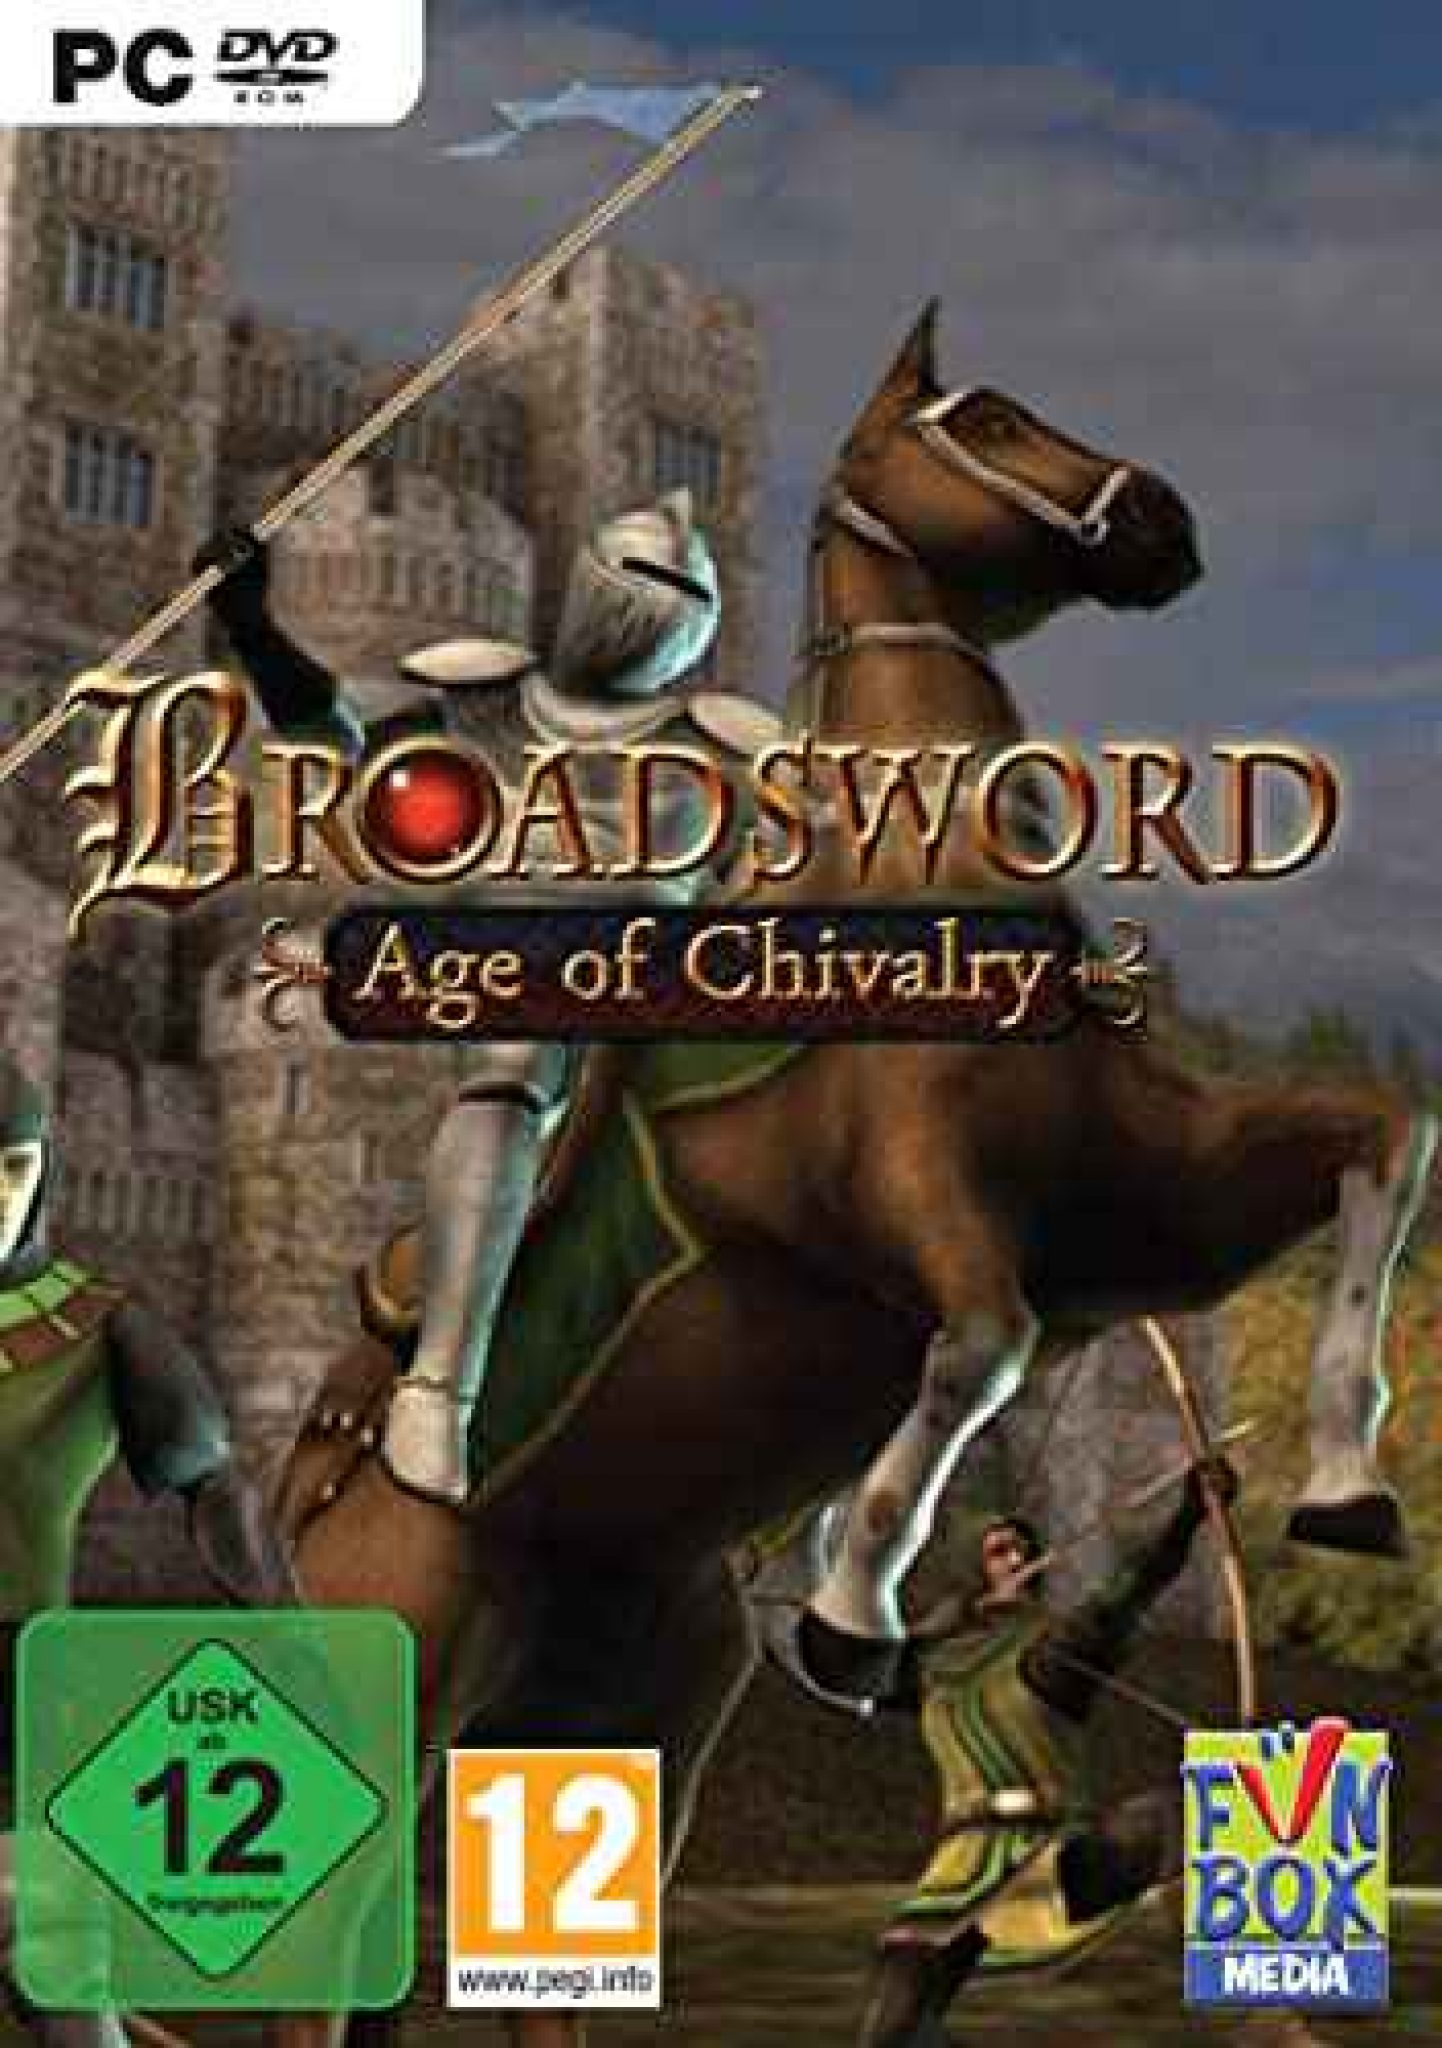 download games like chivalry for free